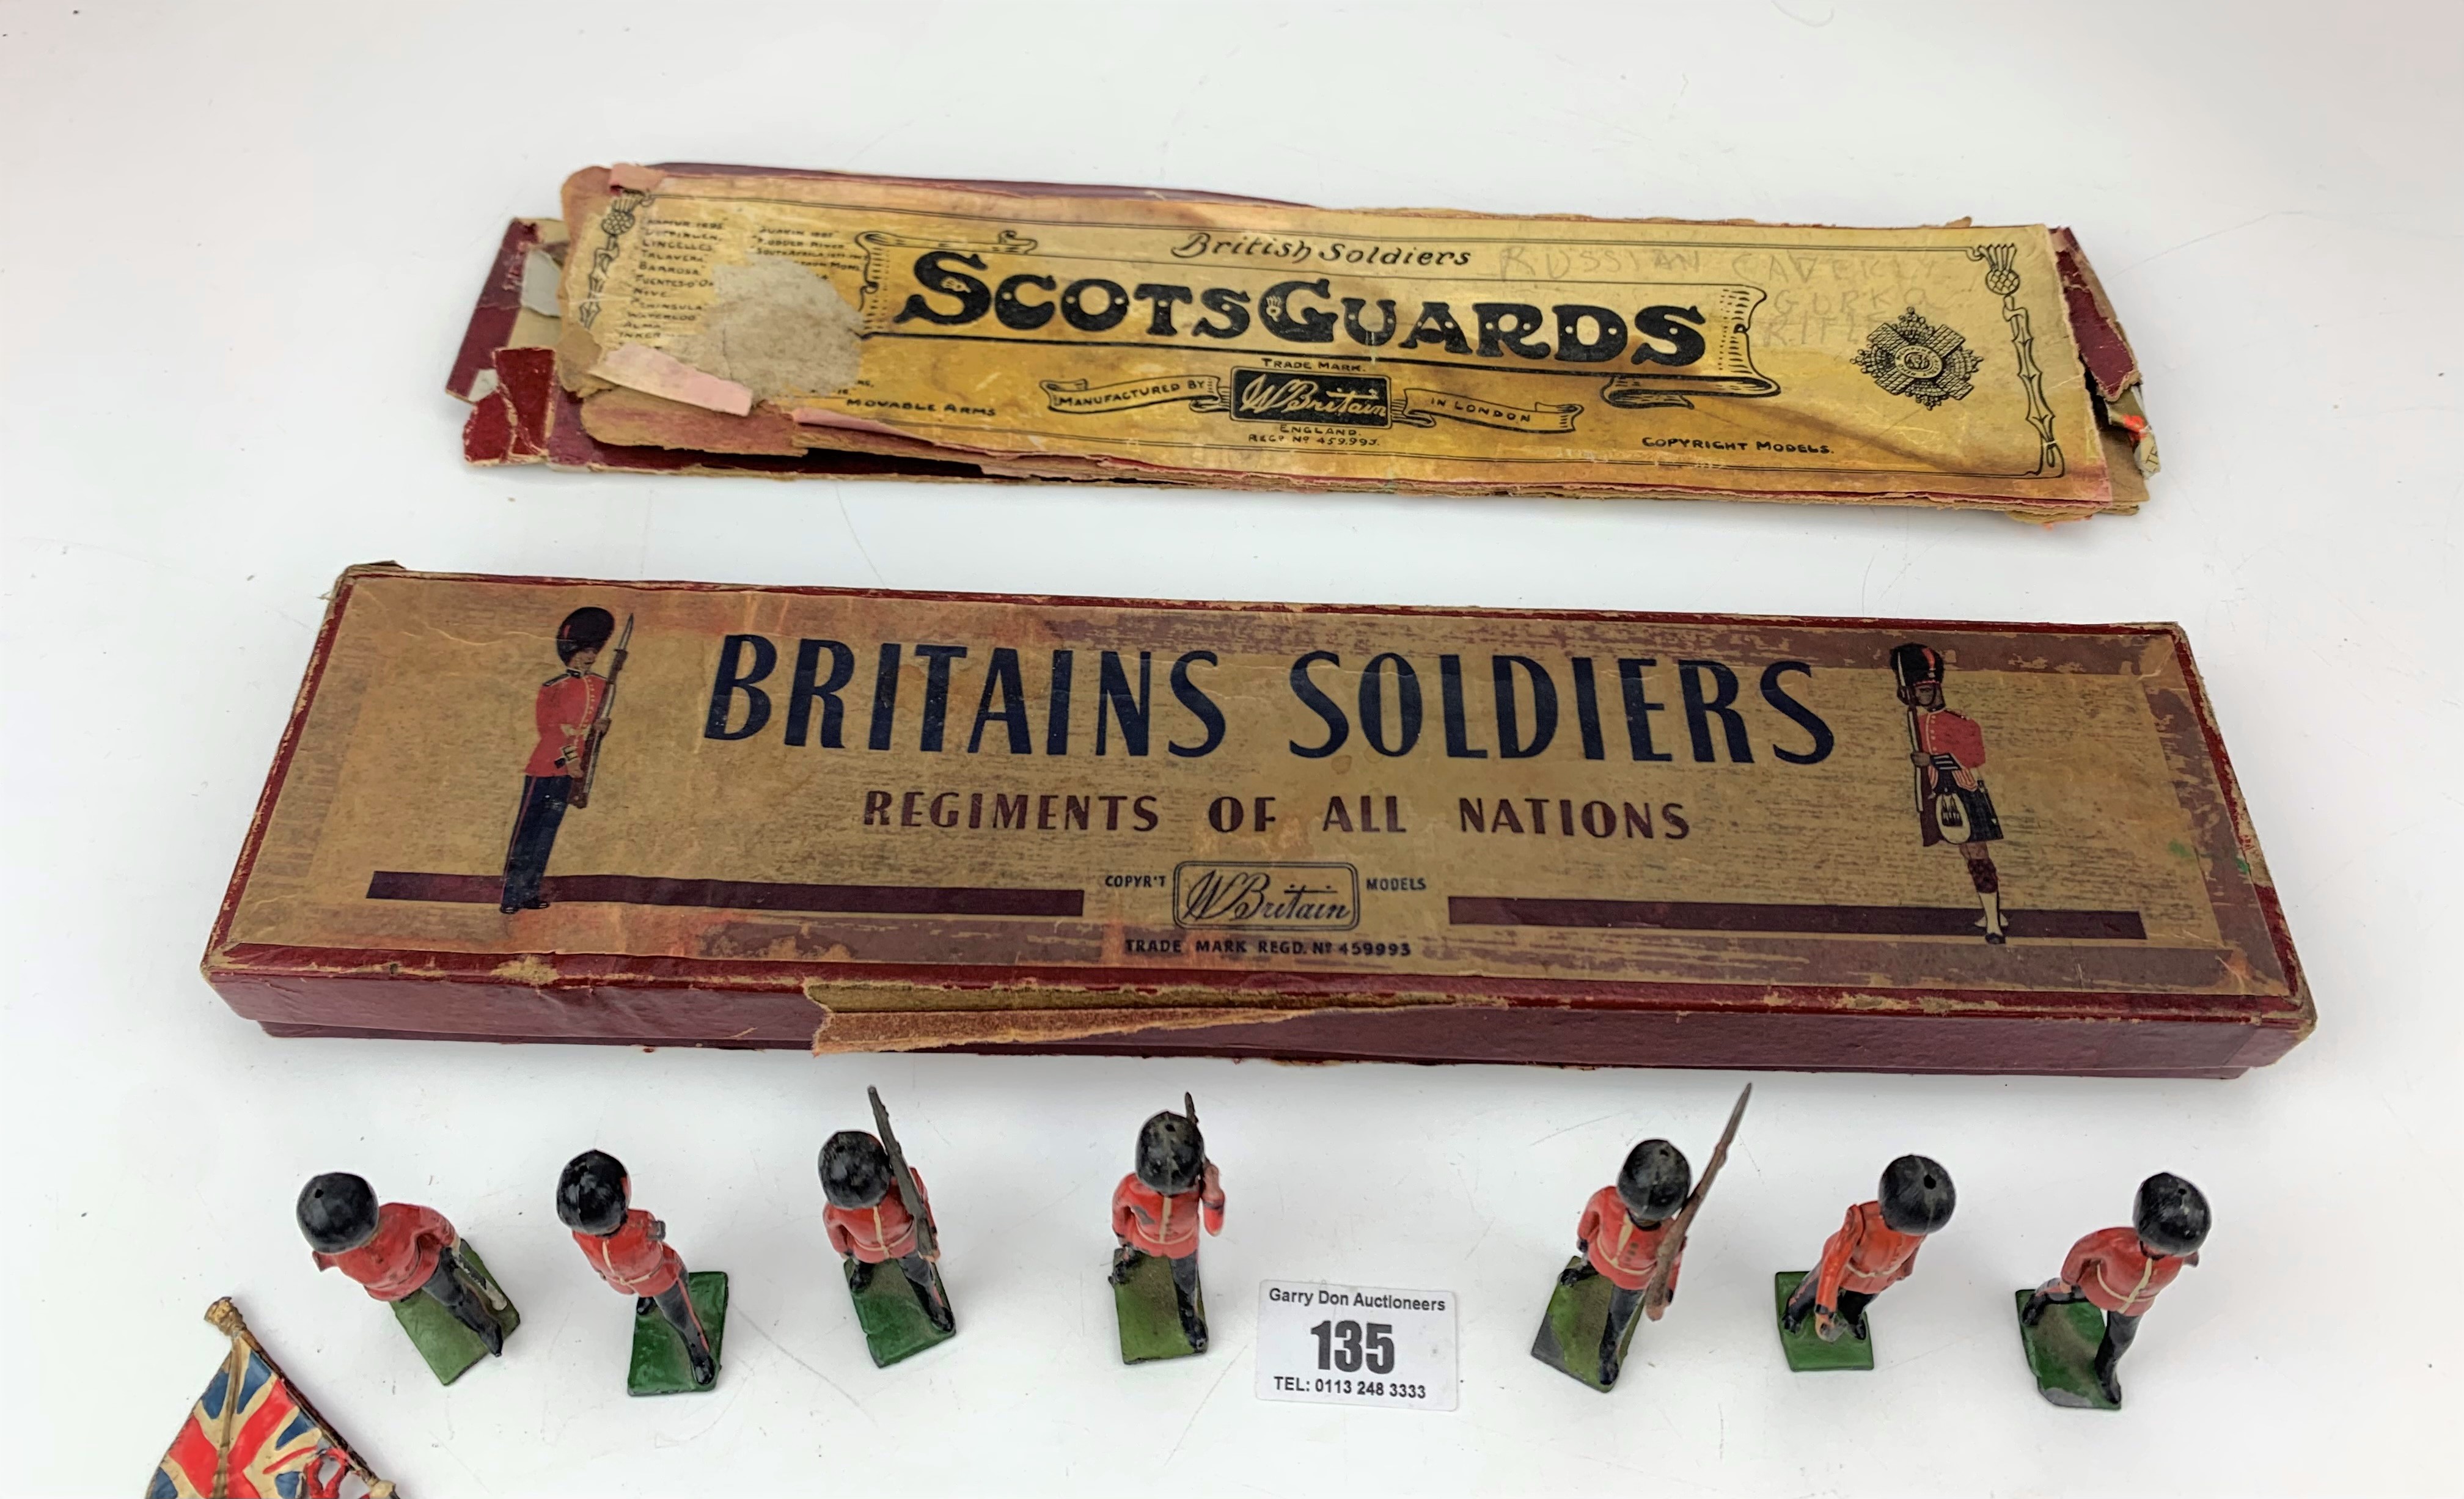 Boxed Britains Soldiers, Regiments of All Nations – Colours & Pioneers of the Scots Guards no. 82 - Image 2 of 10